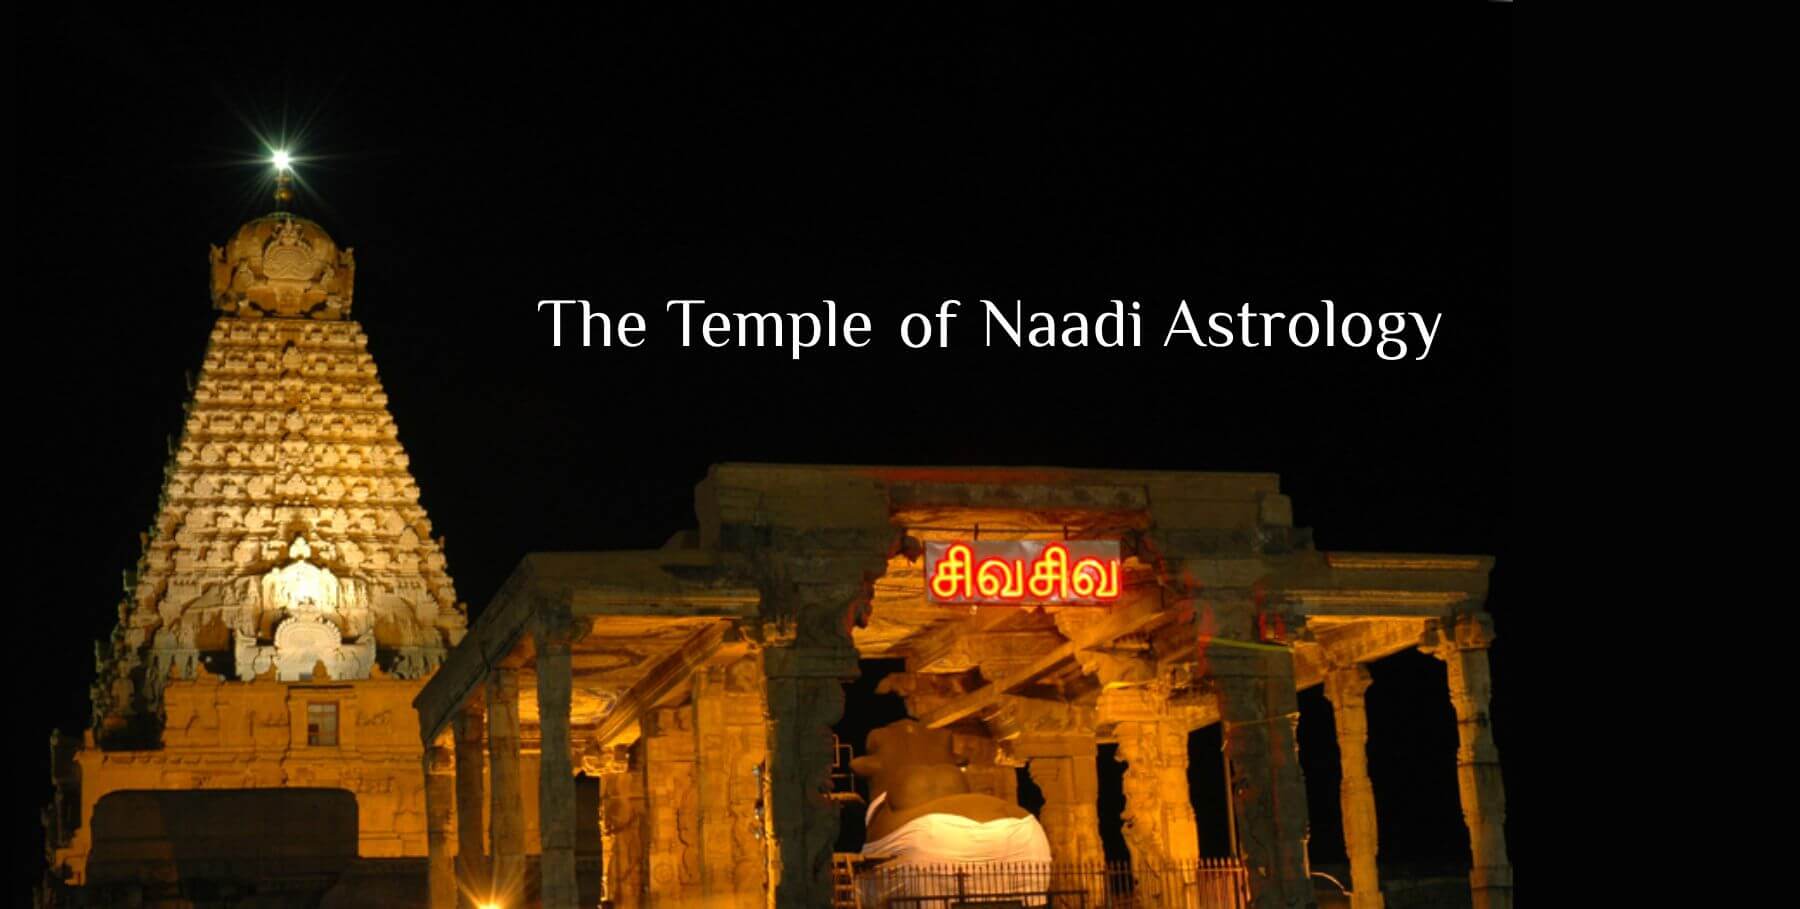 The Temple of Naadi Astrology